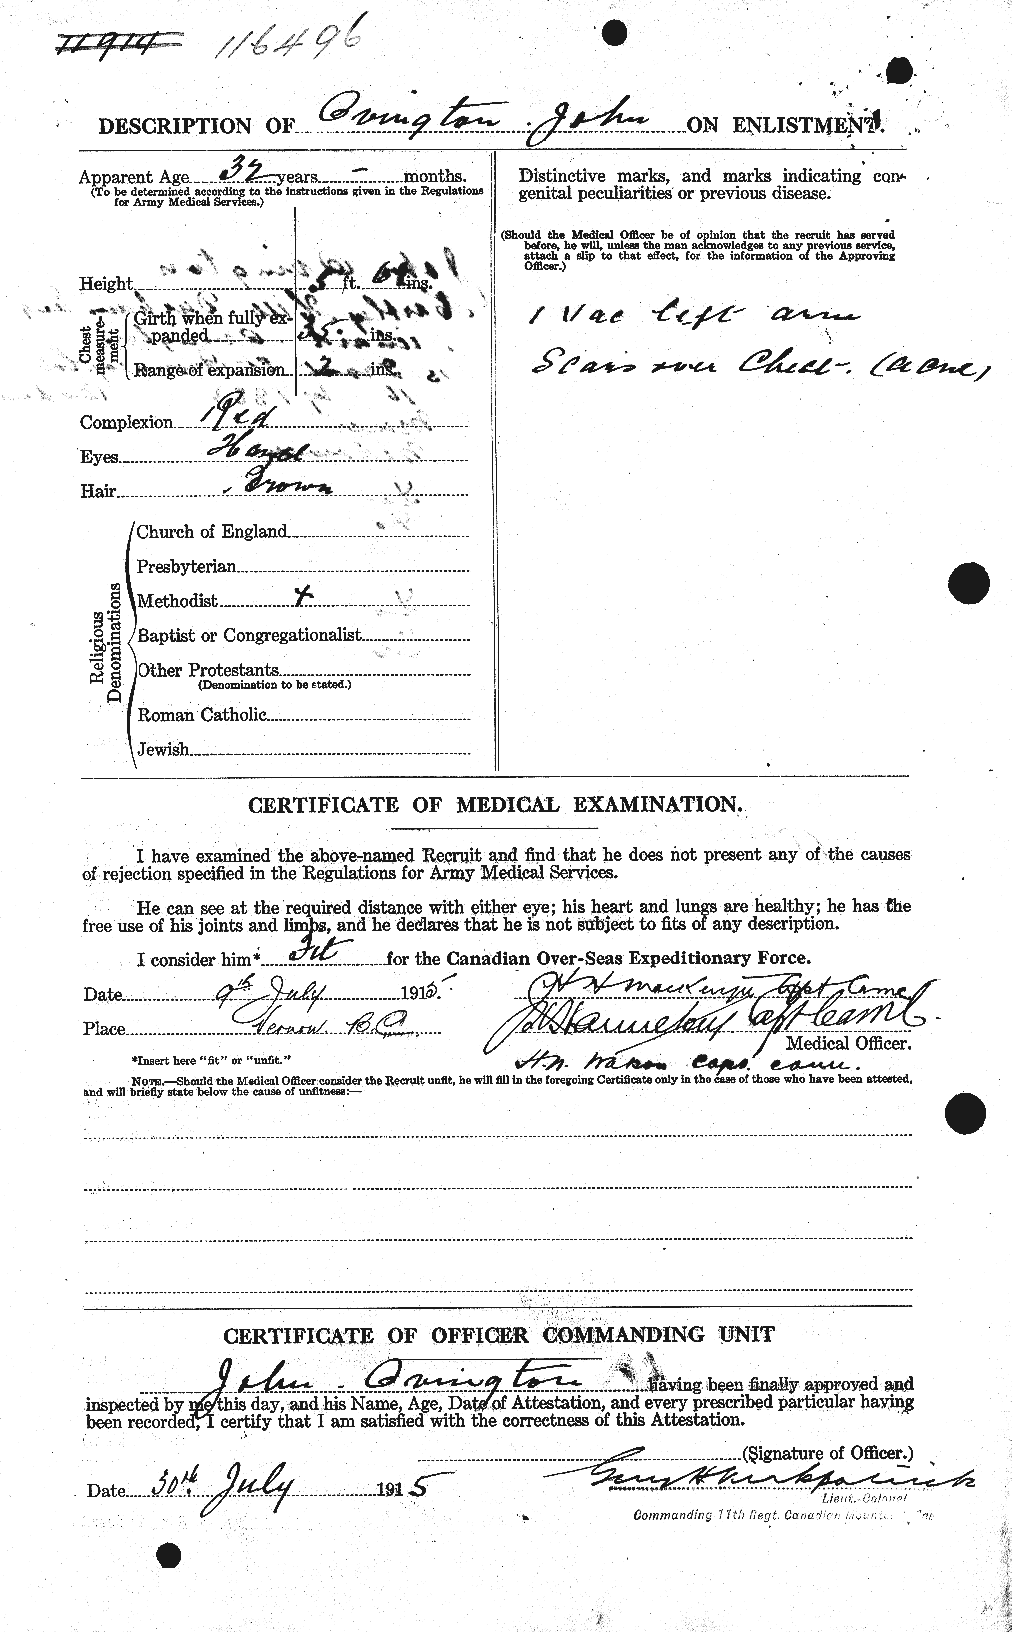 Personnel Records of the First World War - CEF 561172b